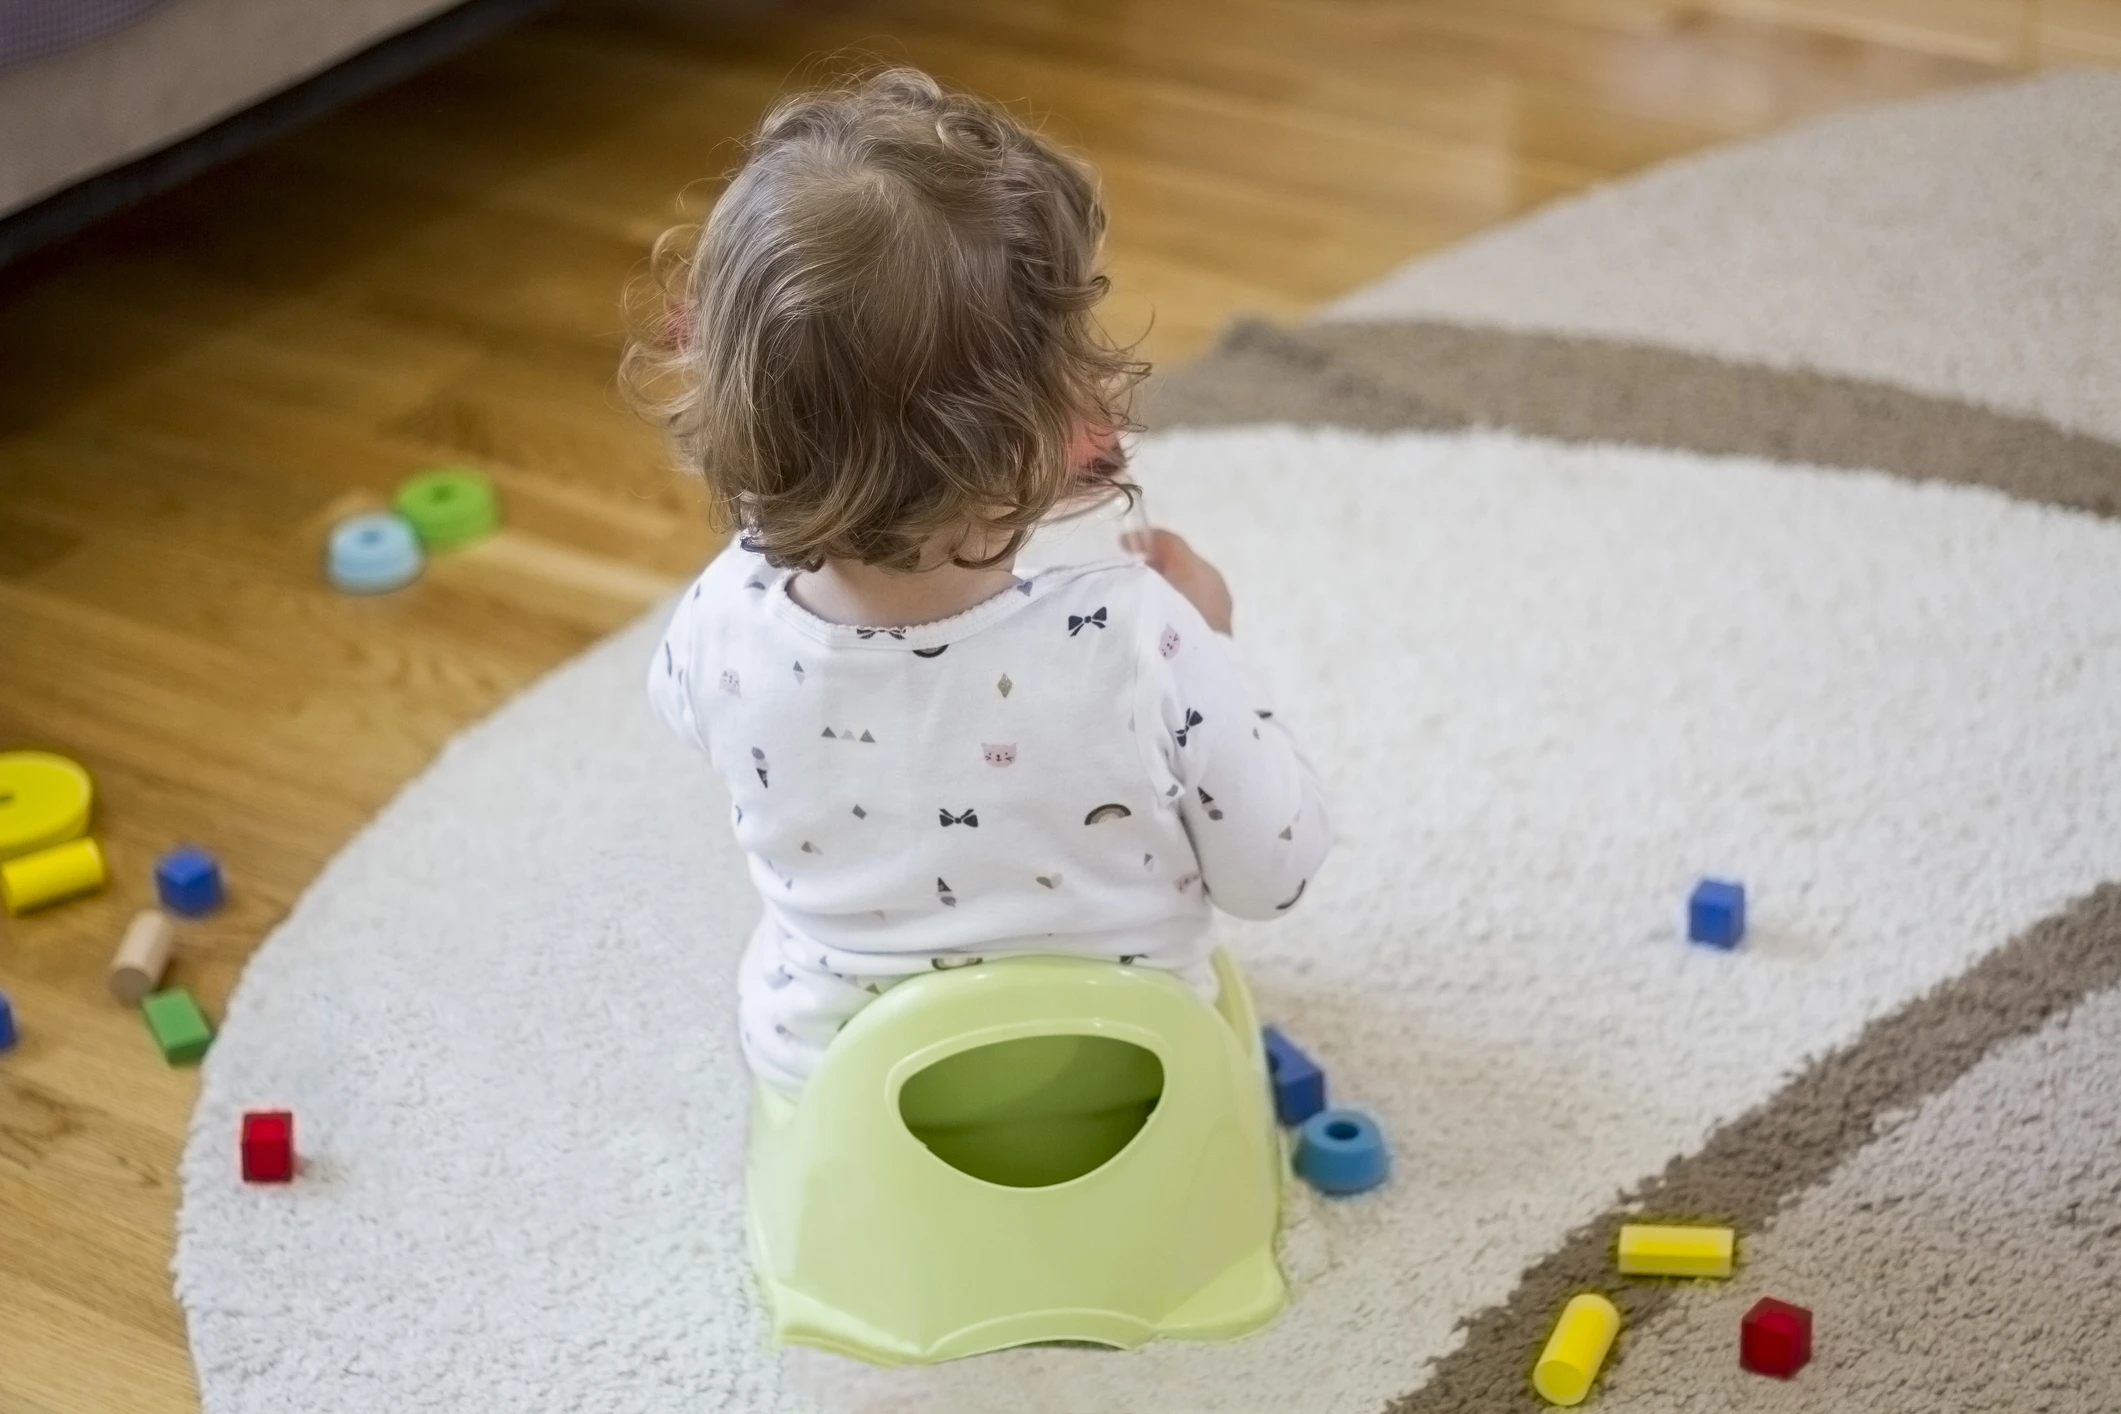 Child sitting on potty and playing with colorful toys